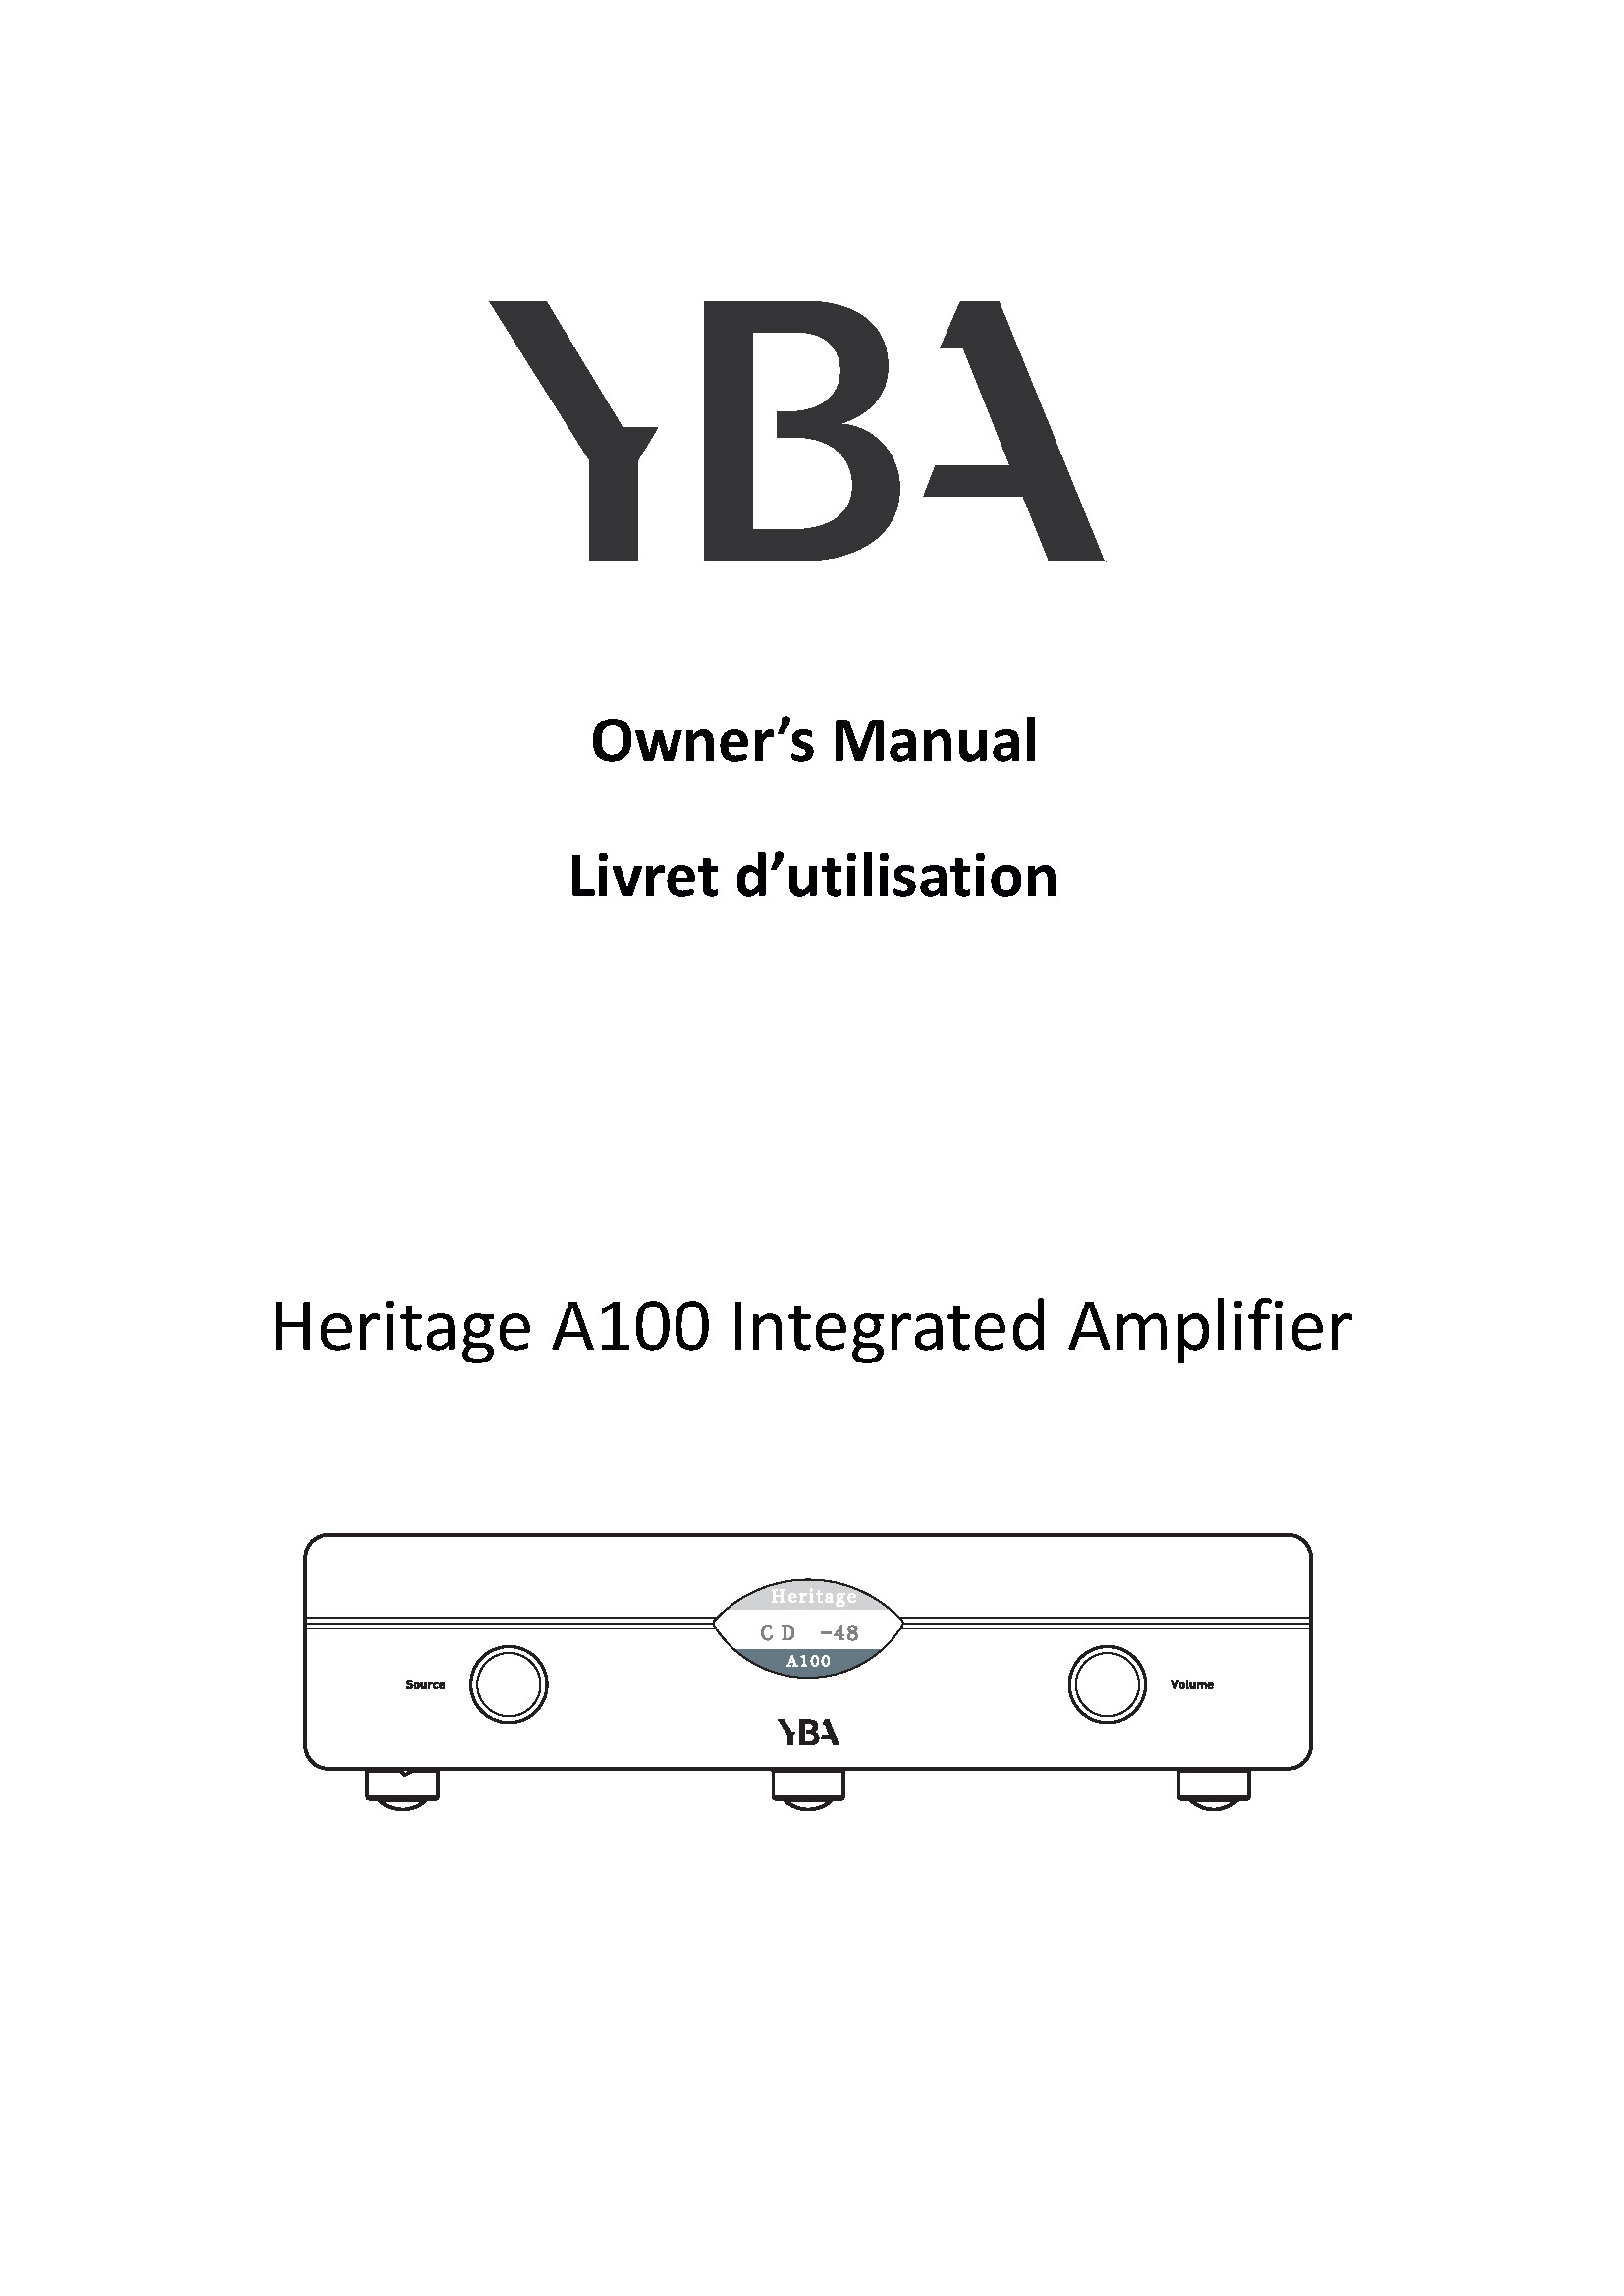 YBA Heritage A100 Owner Manual - Norman Audio